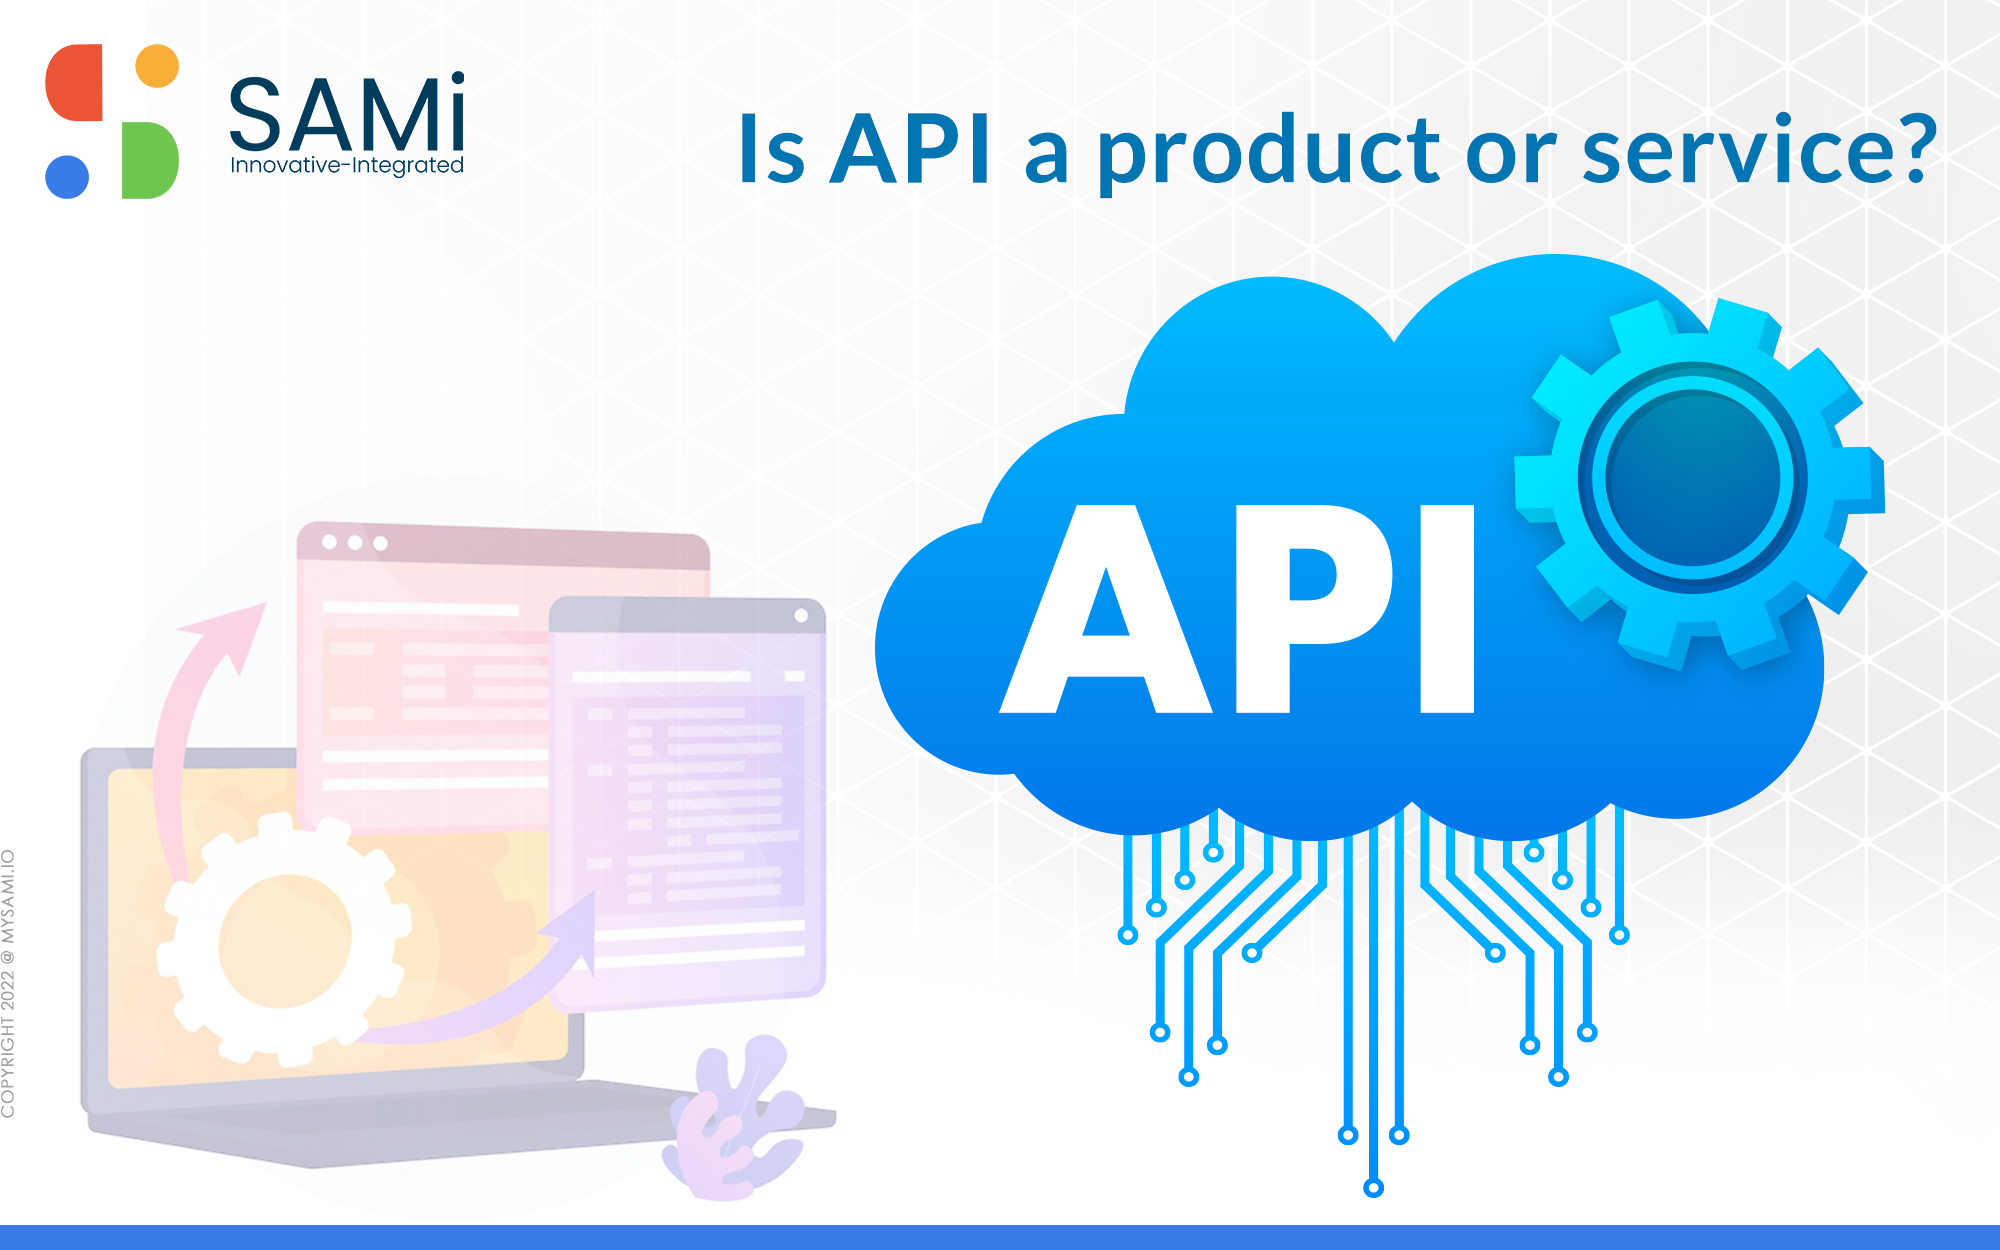 API is a product or service